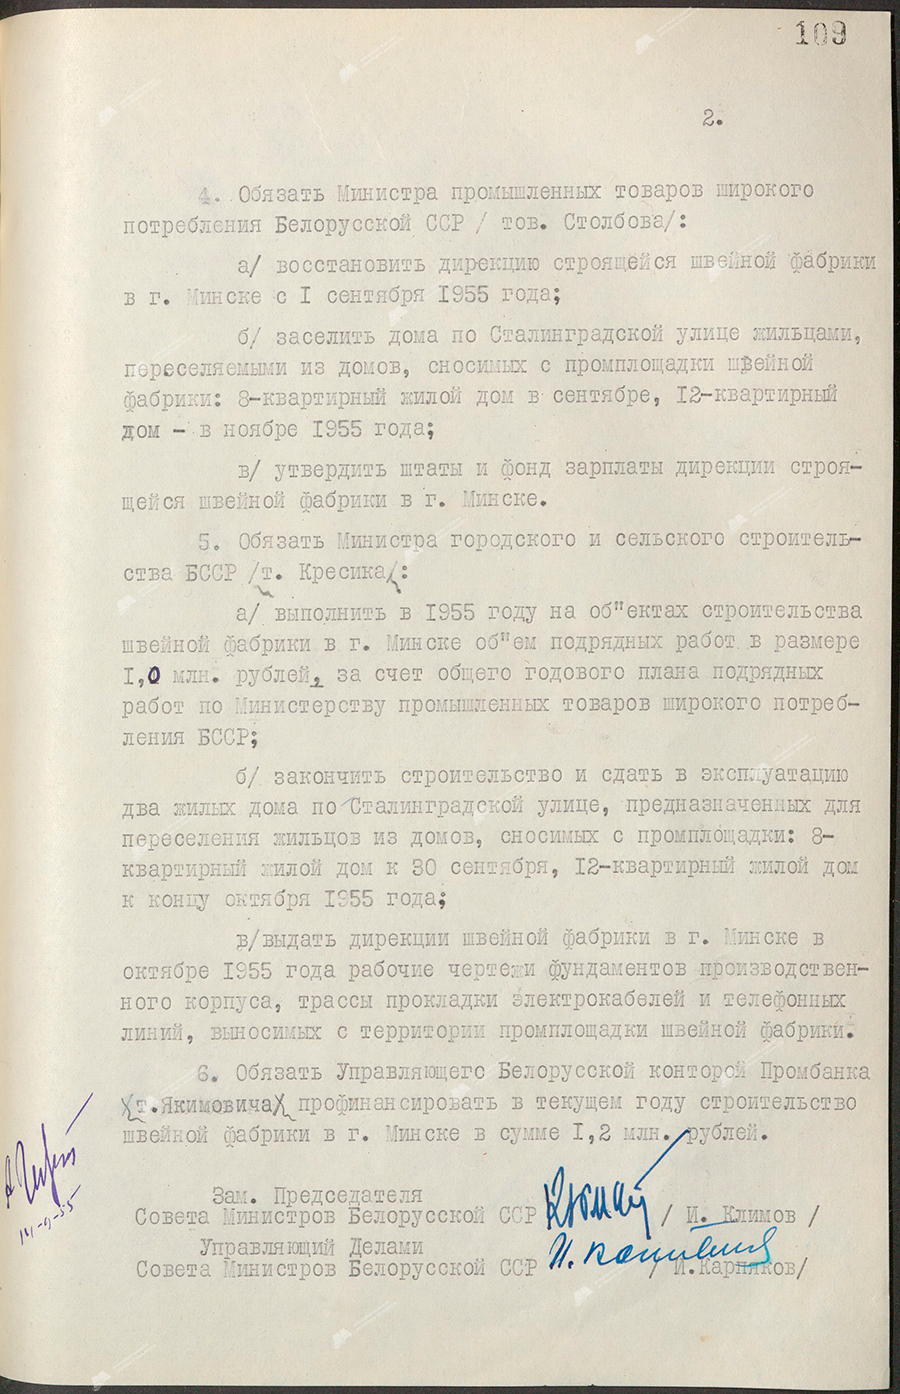 Resolution No. 512 of the Council of Ministers of the Byelorussian SSR «On approval of a comprehensive design assignment for the construction of a garment factory in Minsk»-стр. 1